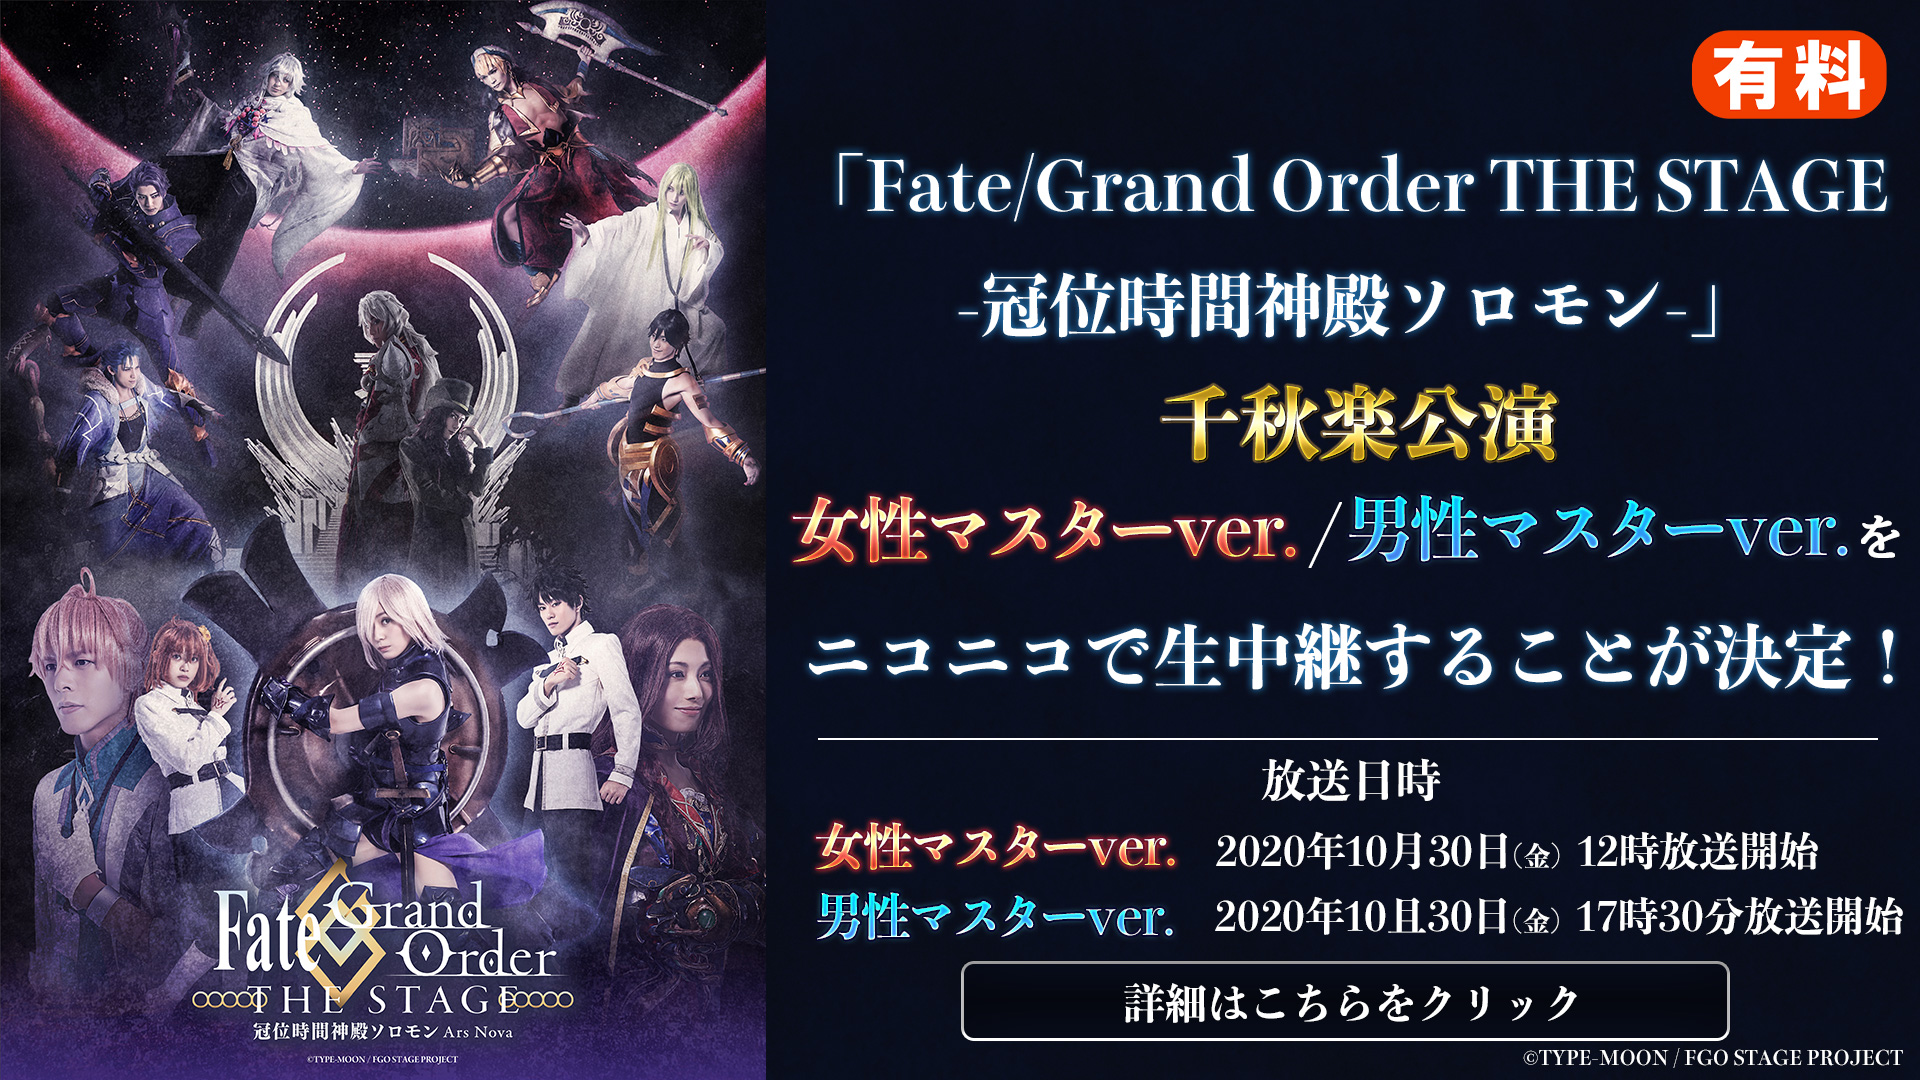 Fate Grand Order The Stage 冠位時間神殿ソロモン 千秋楽公演 生中継 ニコニコインフォ